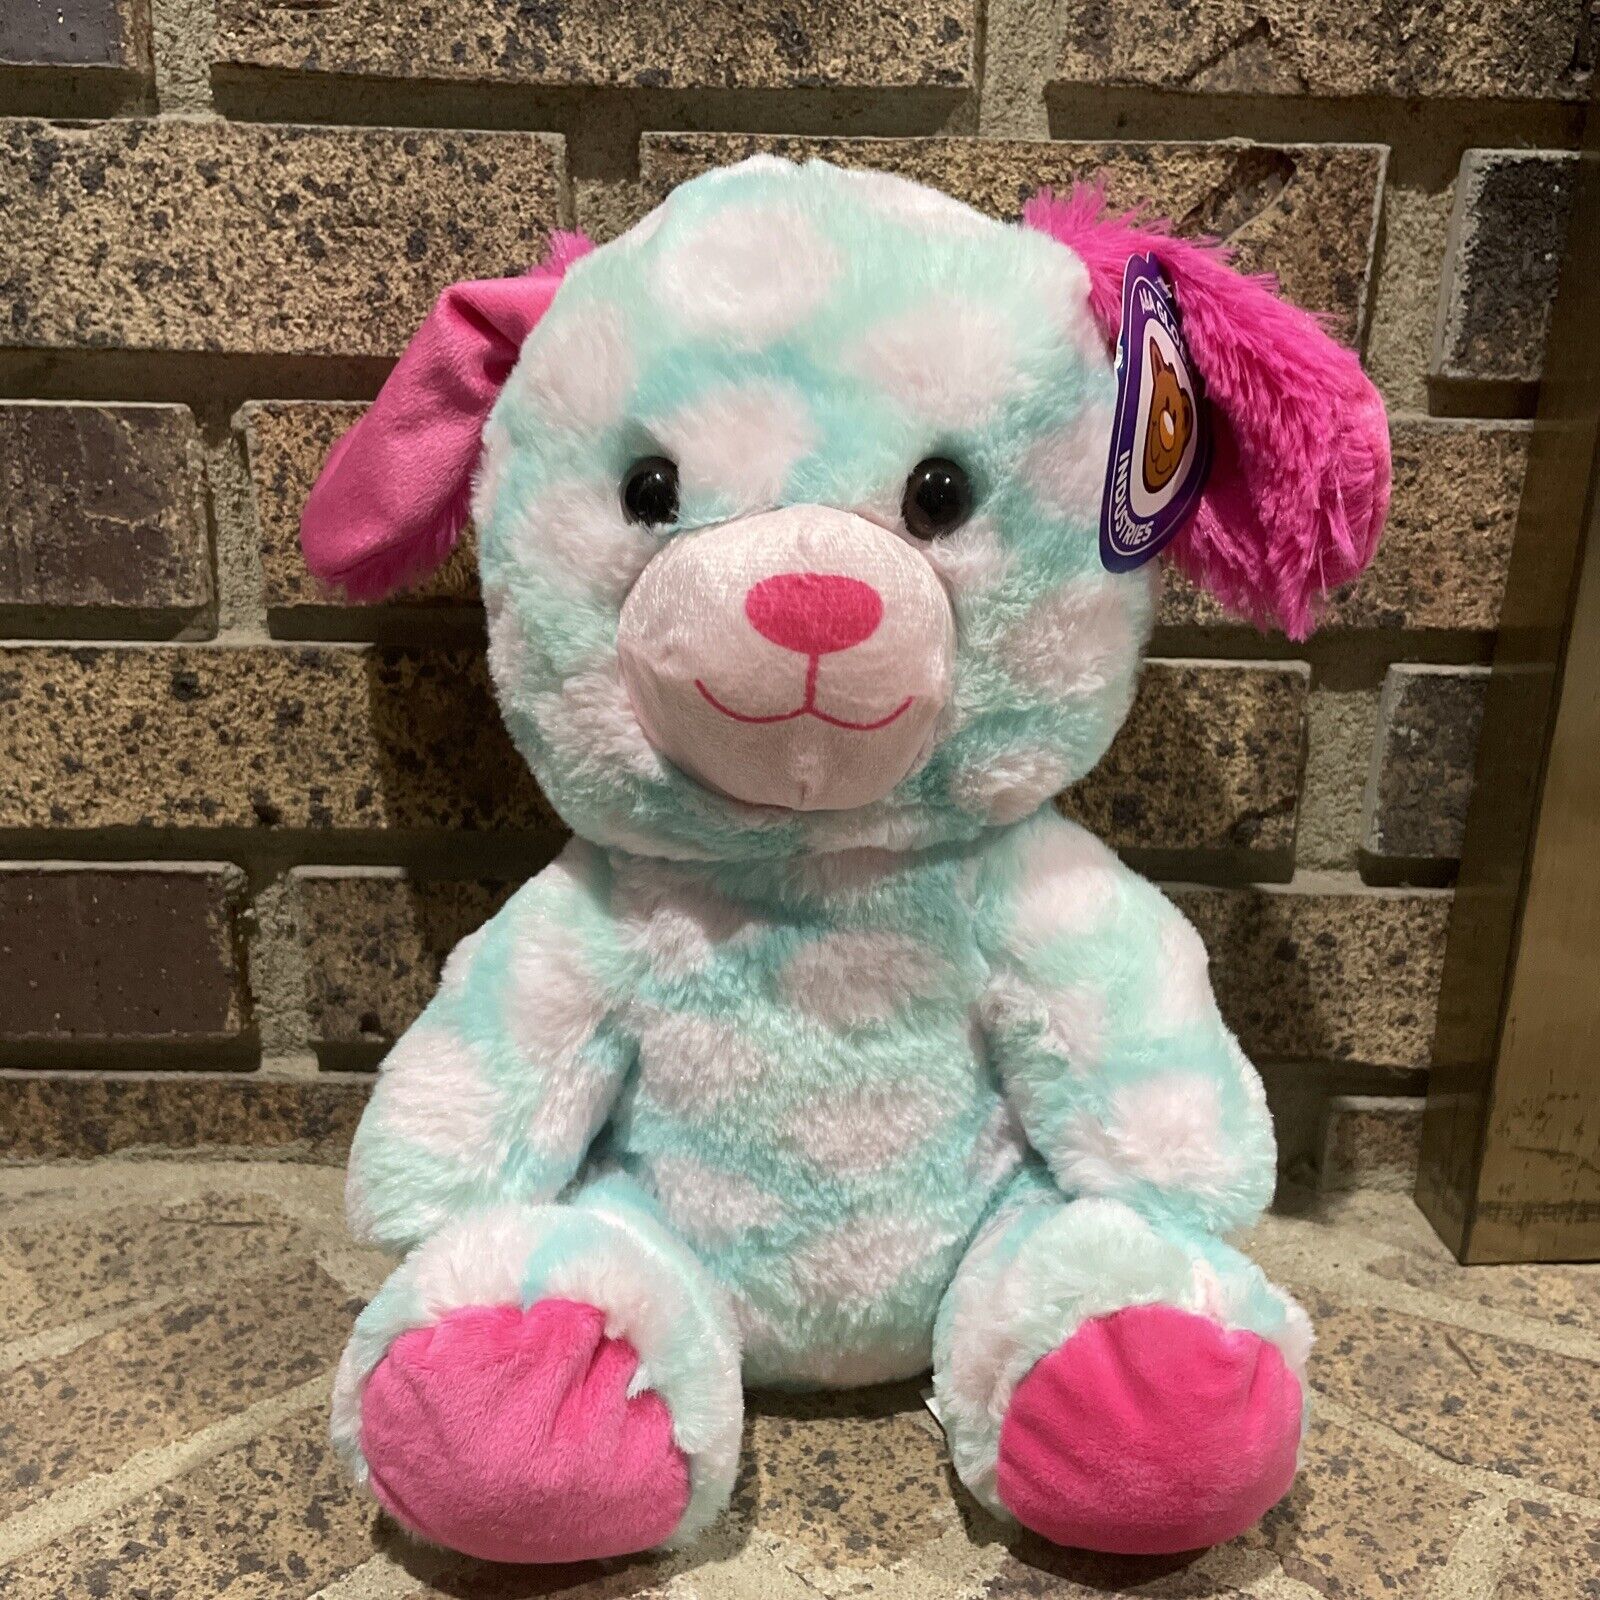 2022 A & A Global Industries Dog Plush Blue and Pink 12” NWT